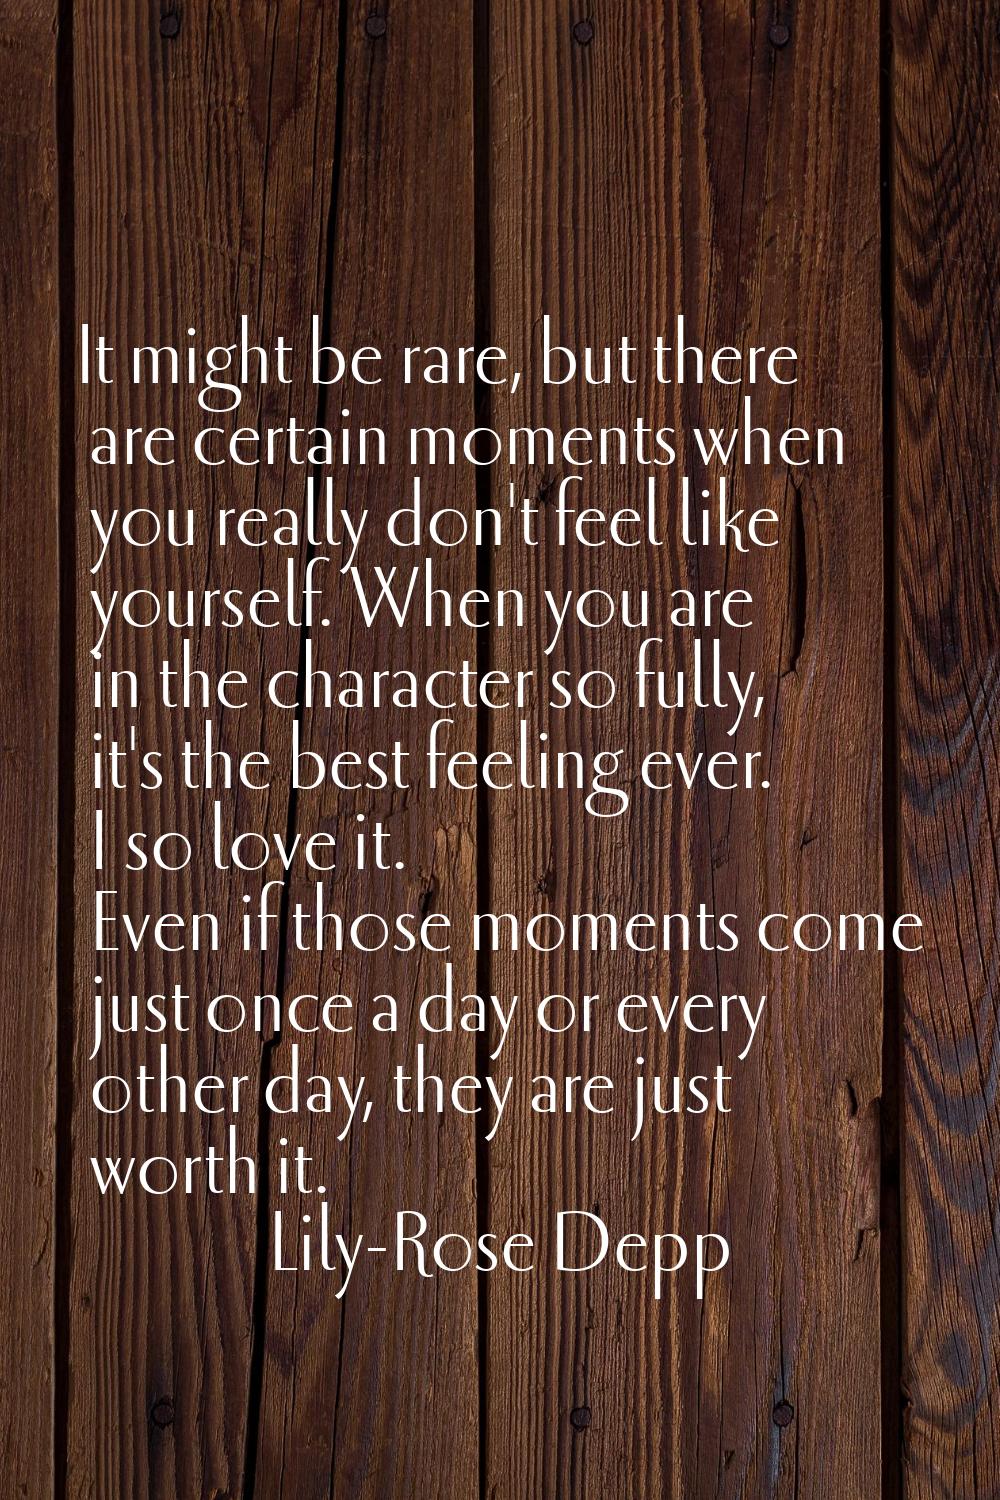 It might be rare, but there are certain moments when you really don't feel like yourself. When you 